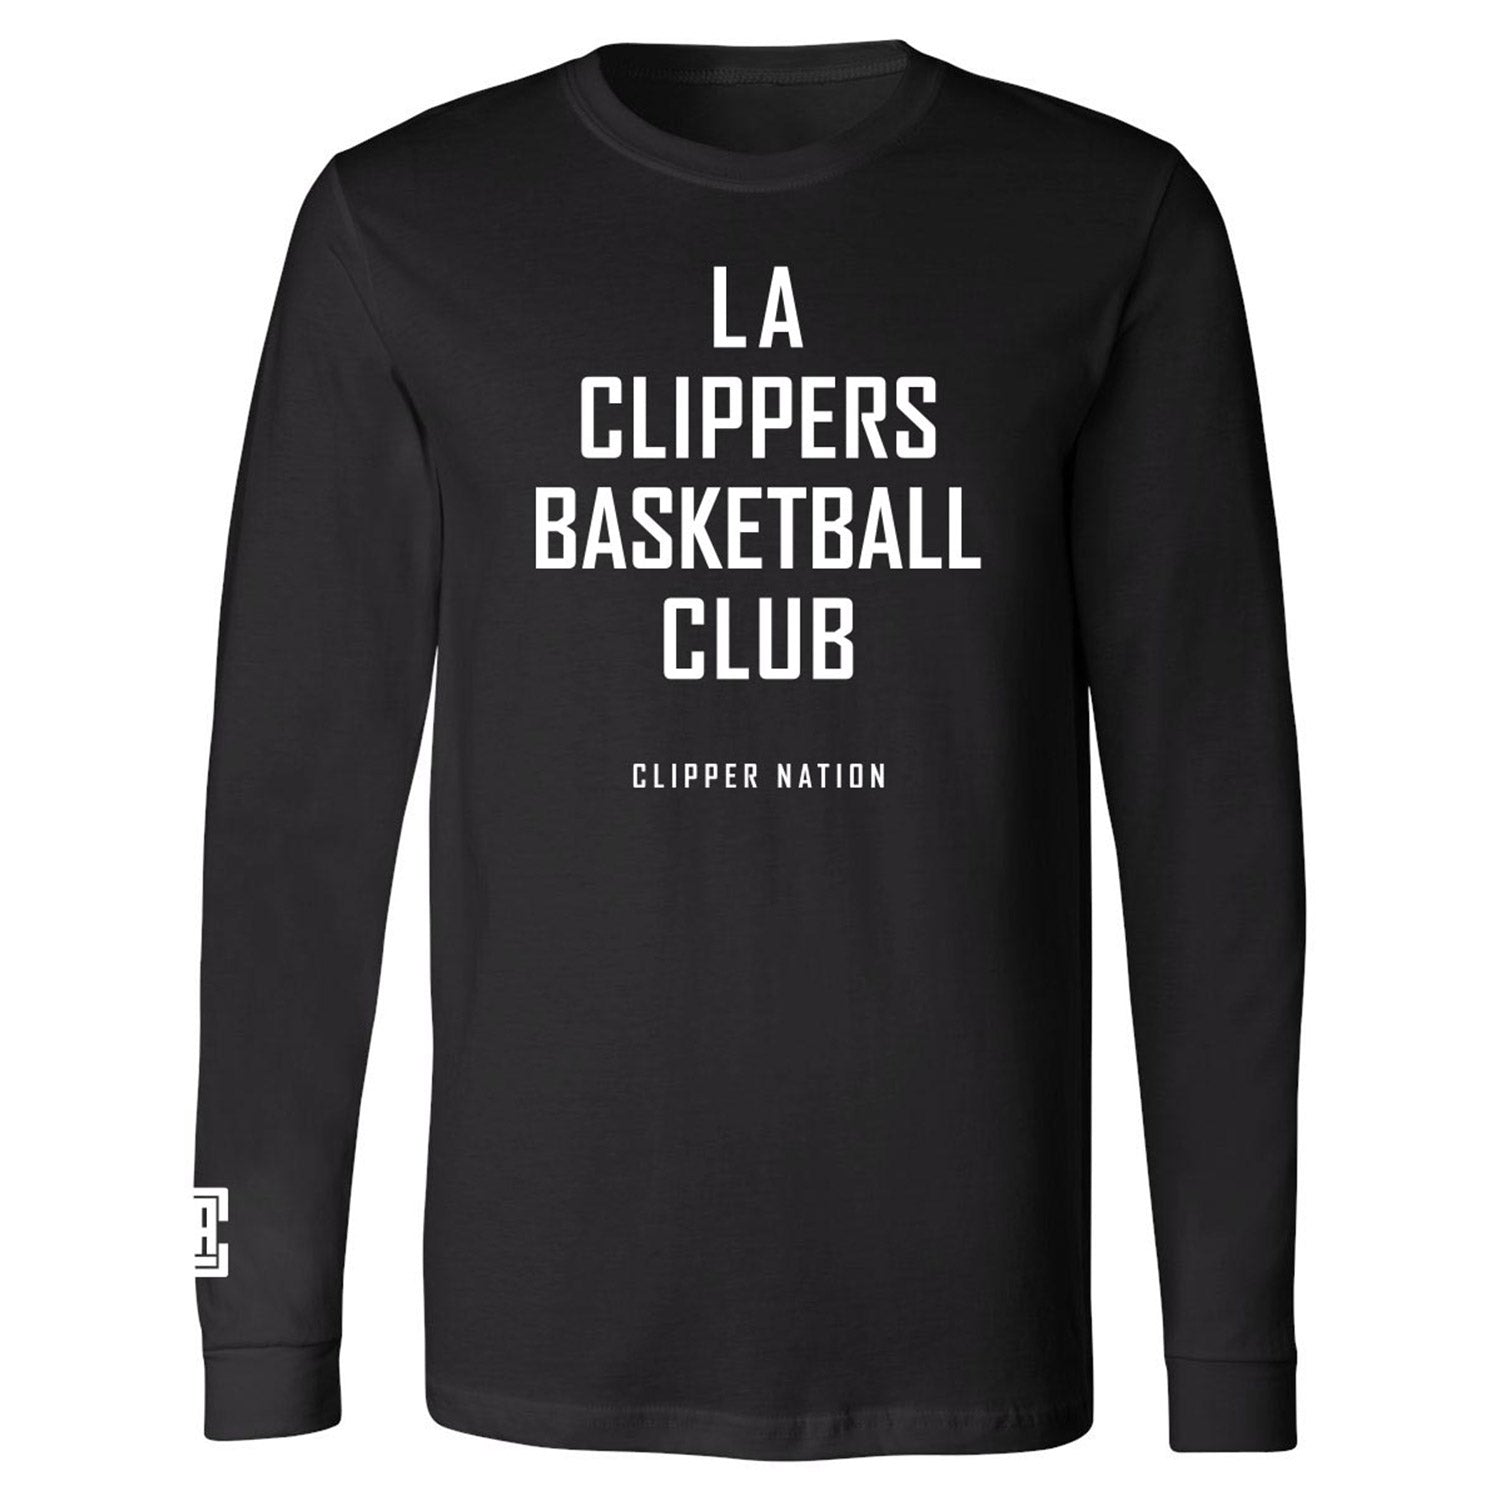 LA Clippers on X: Gear up for Playoffs, #ClipperNation! Get your